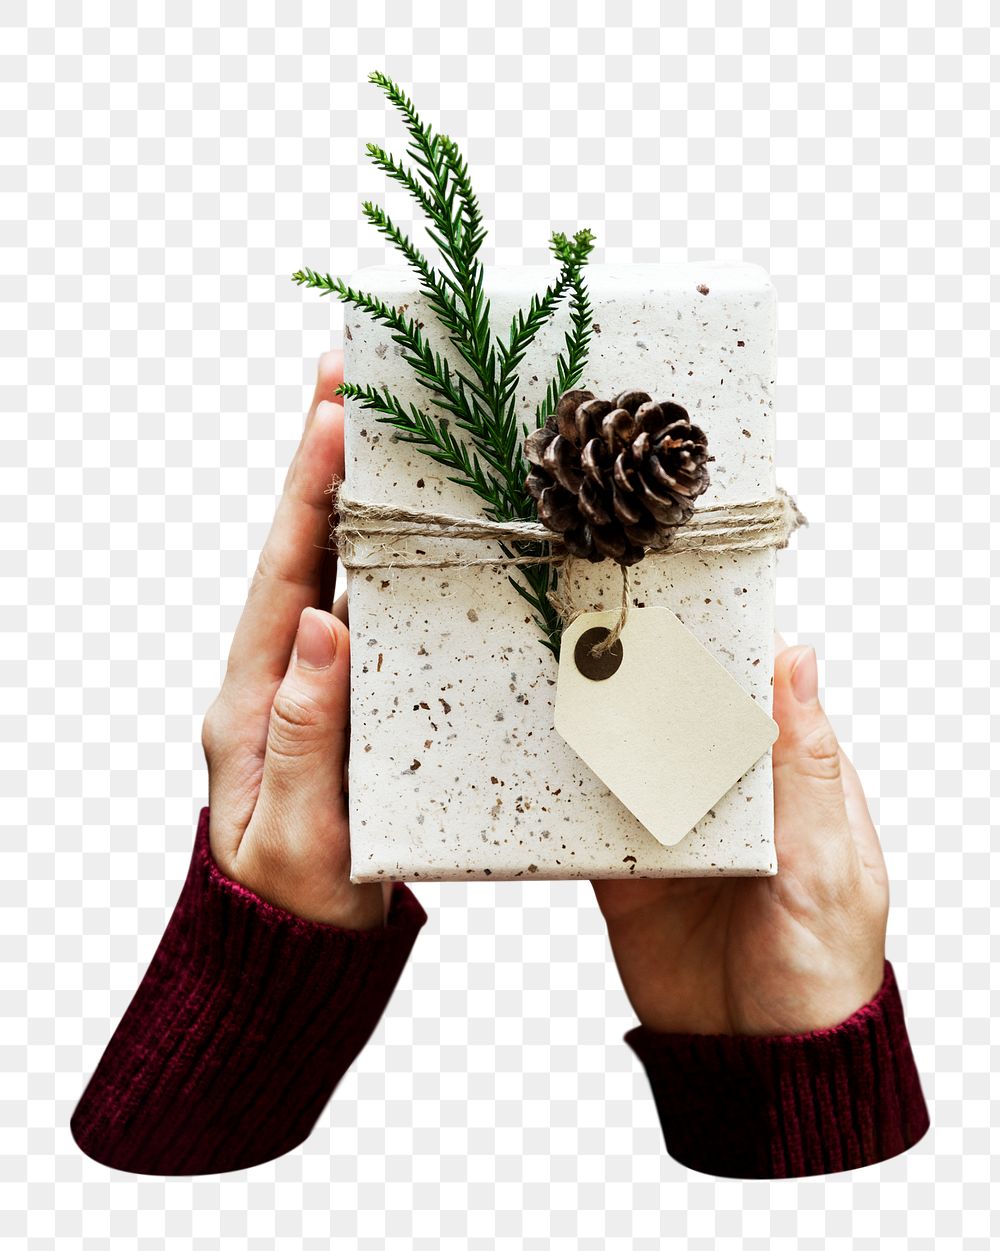 Hands holding Christmas gift png sticker, transparent background